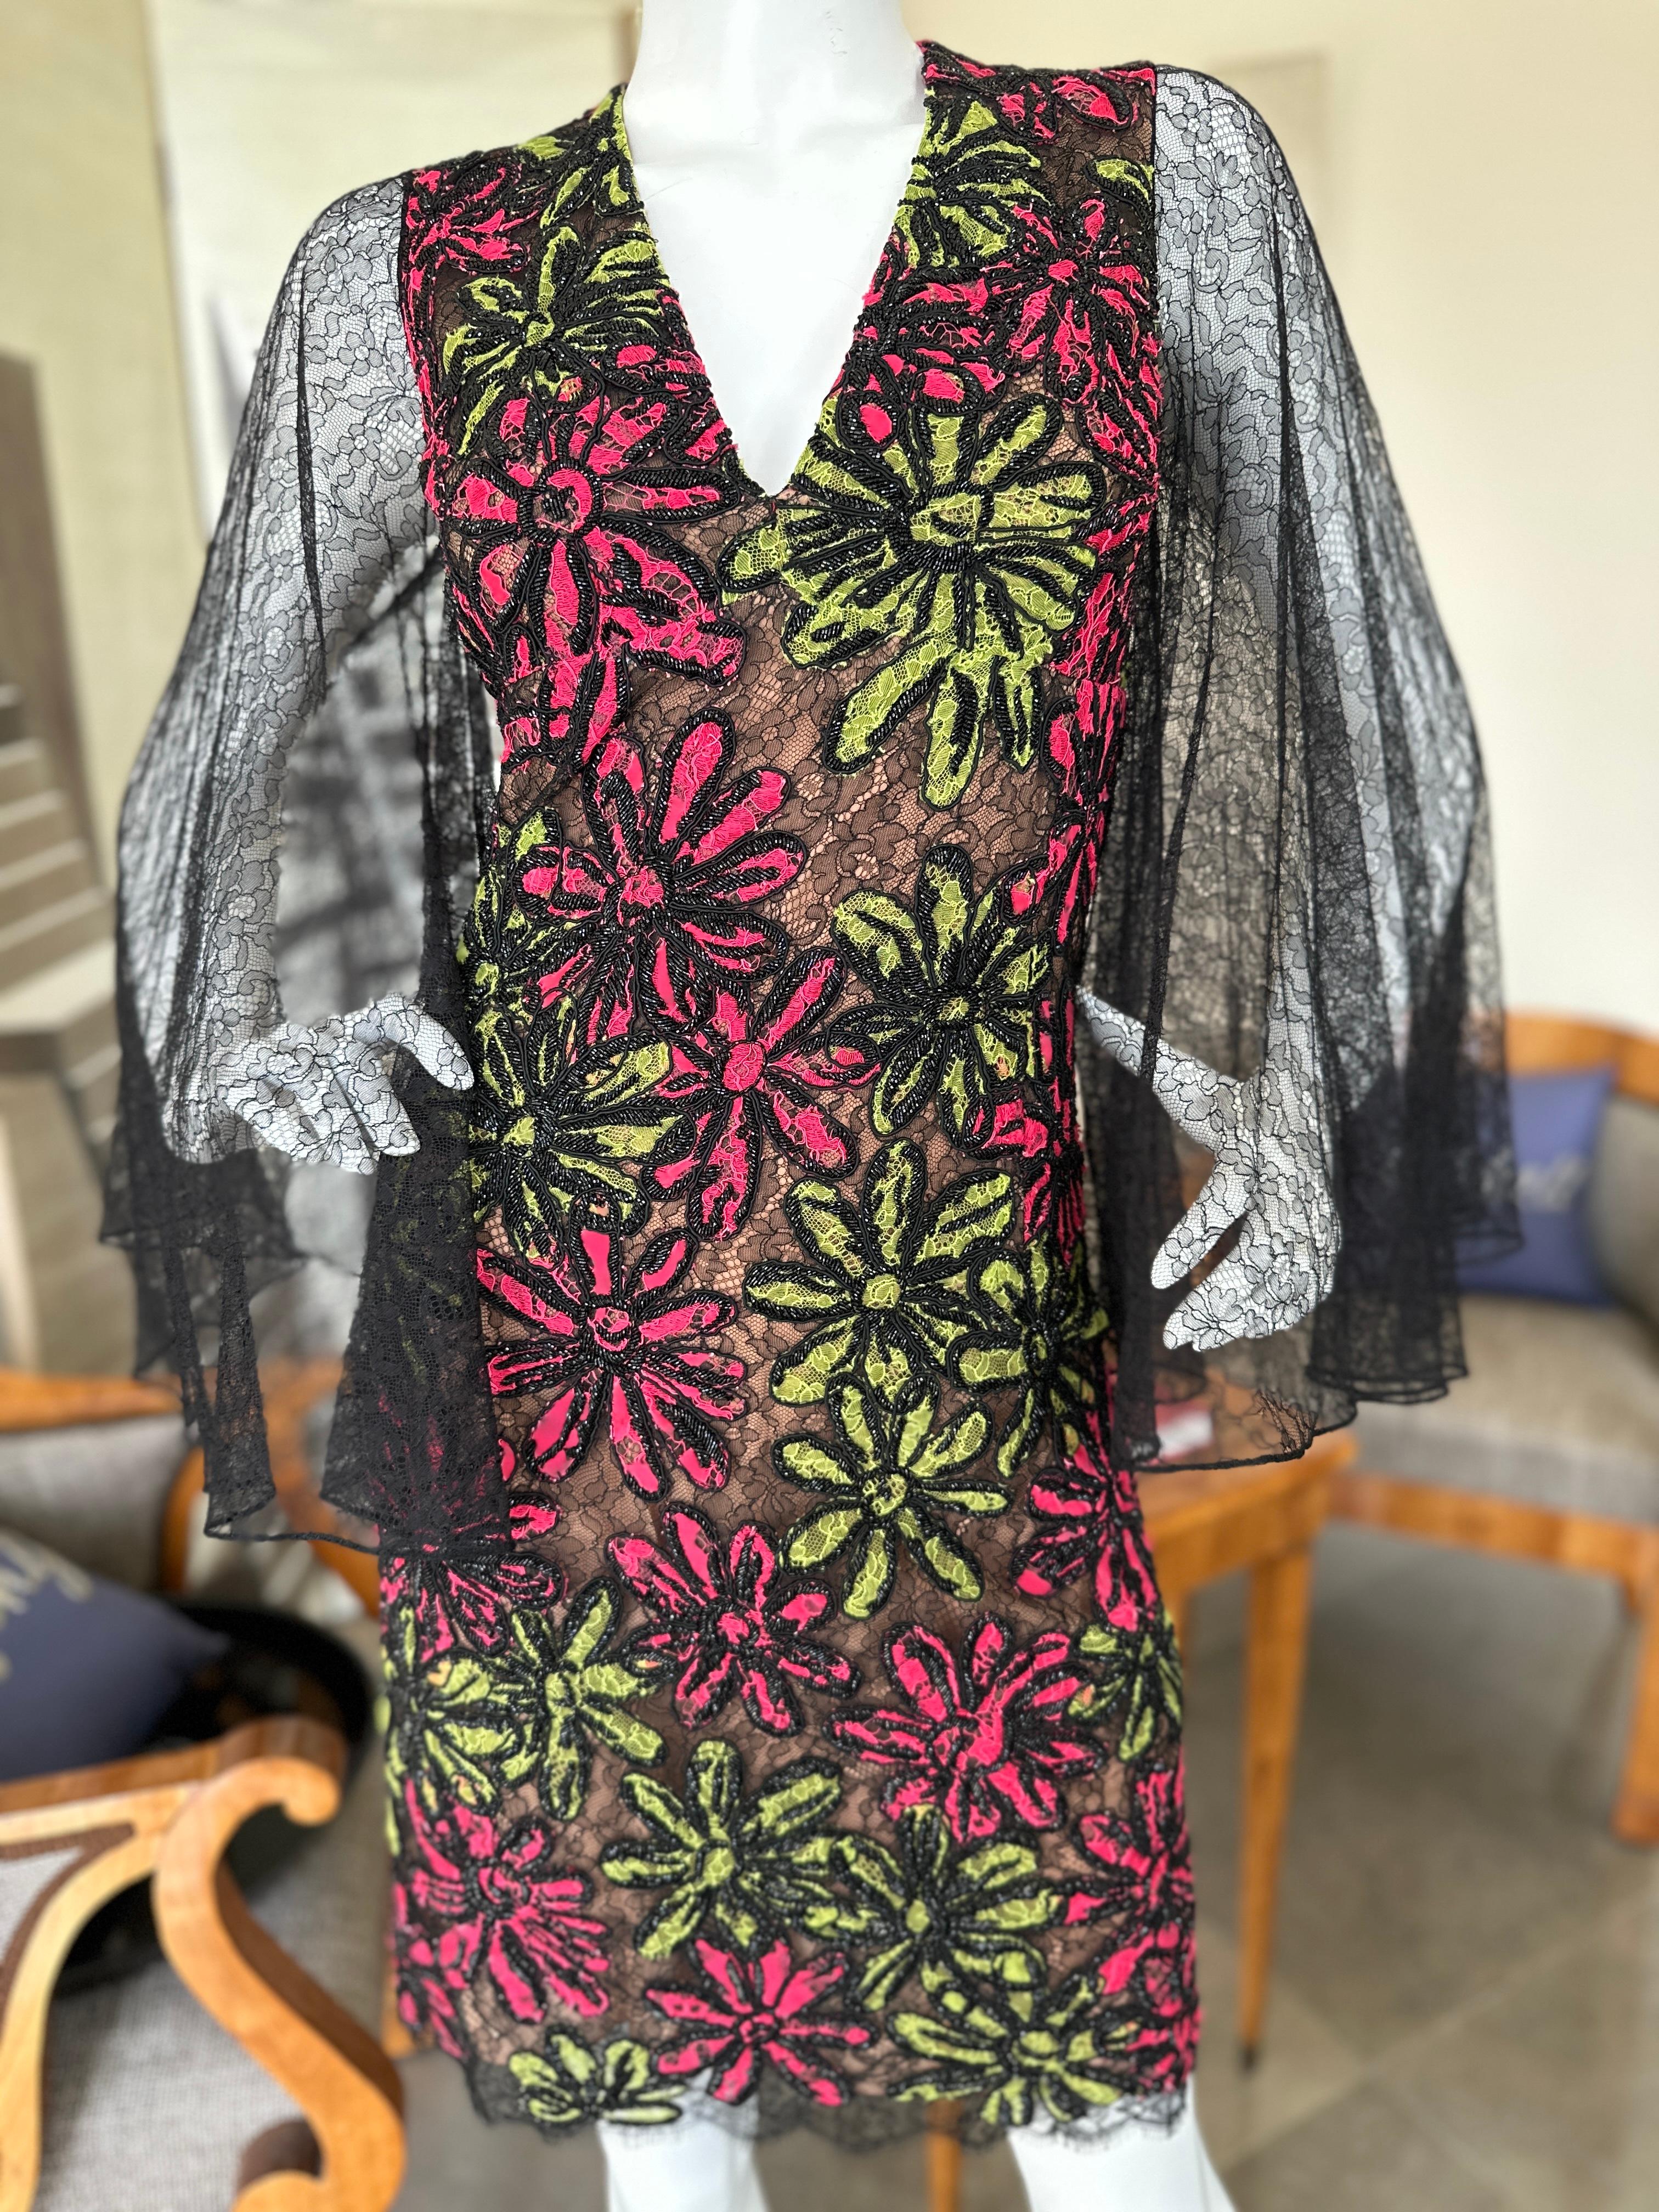 Michael Kors Collection Beaded Floral Dress with Sheer Lace Bell Sleeves (Italy) In Excellent Condition For Sale In Cloverdale, CA